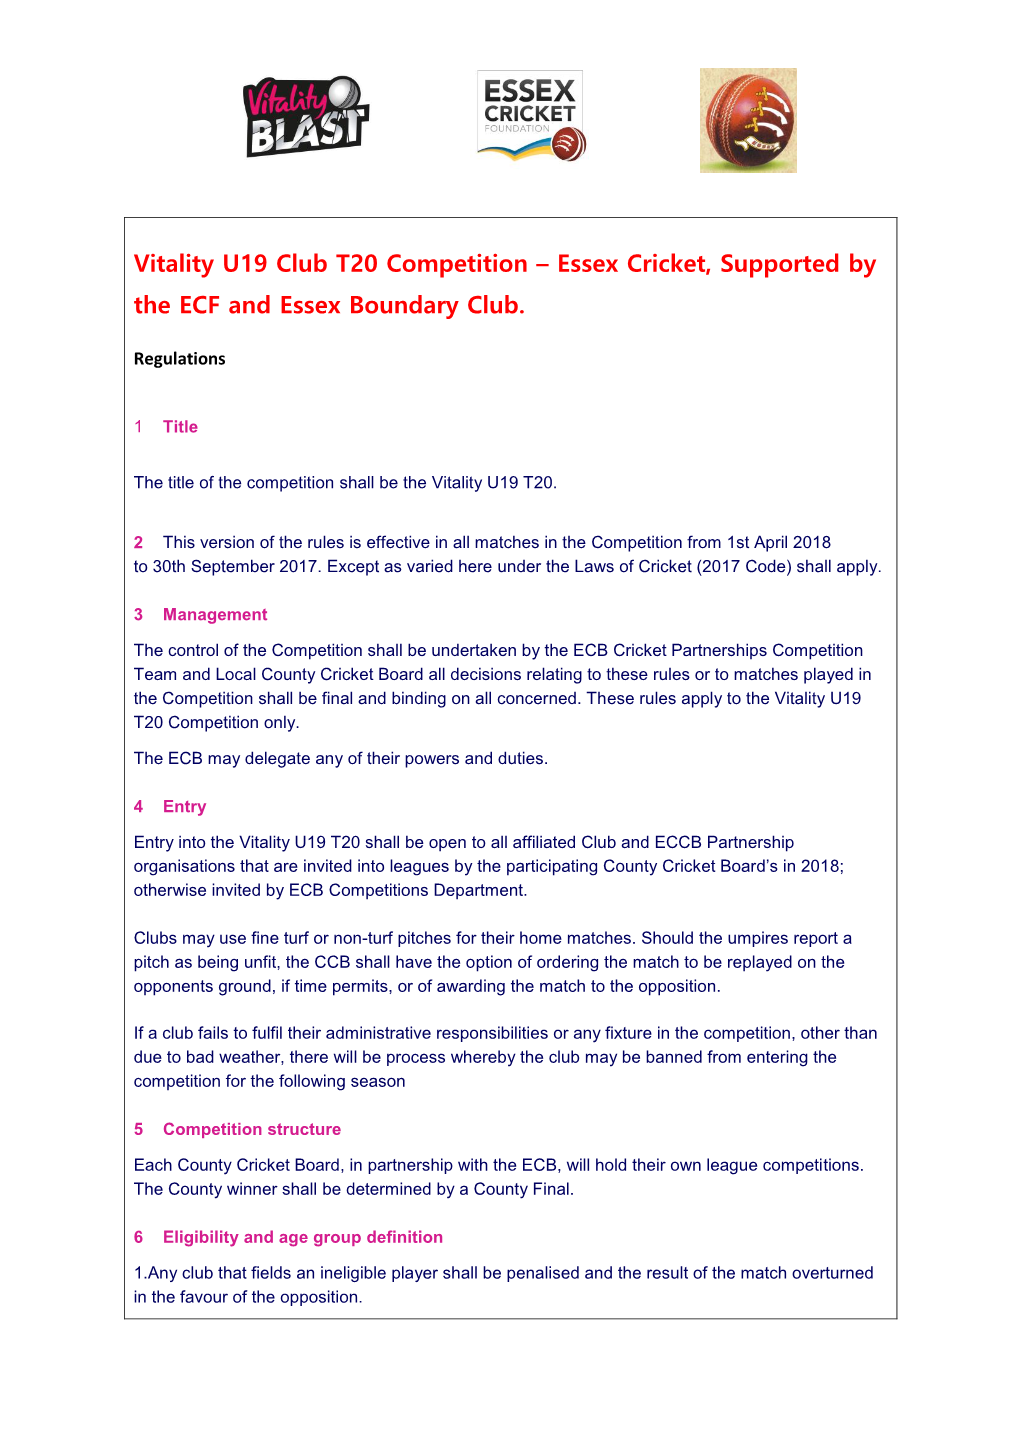 Vitality U19 Club T20 Competition – Essex Cricket, Supported by the ECF and Essex Boundary Club